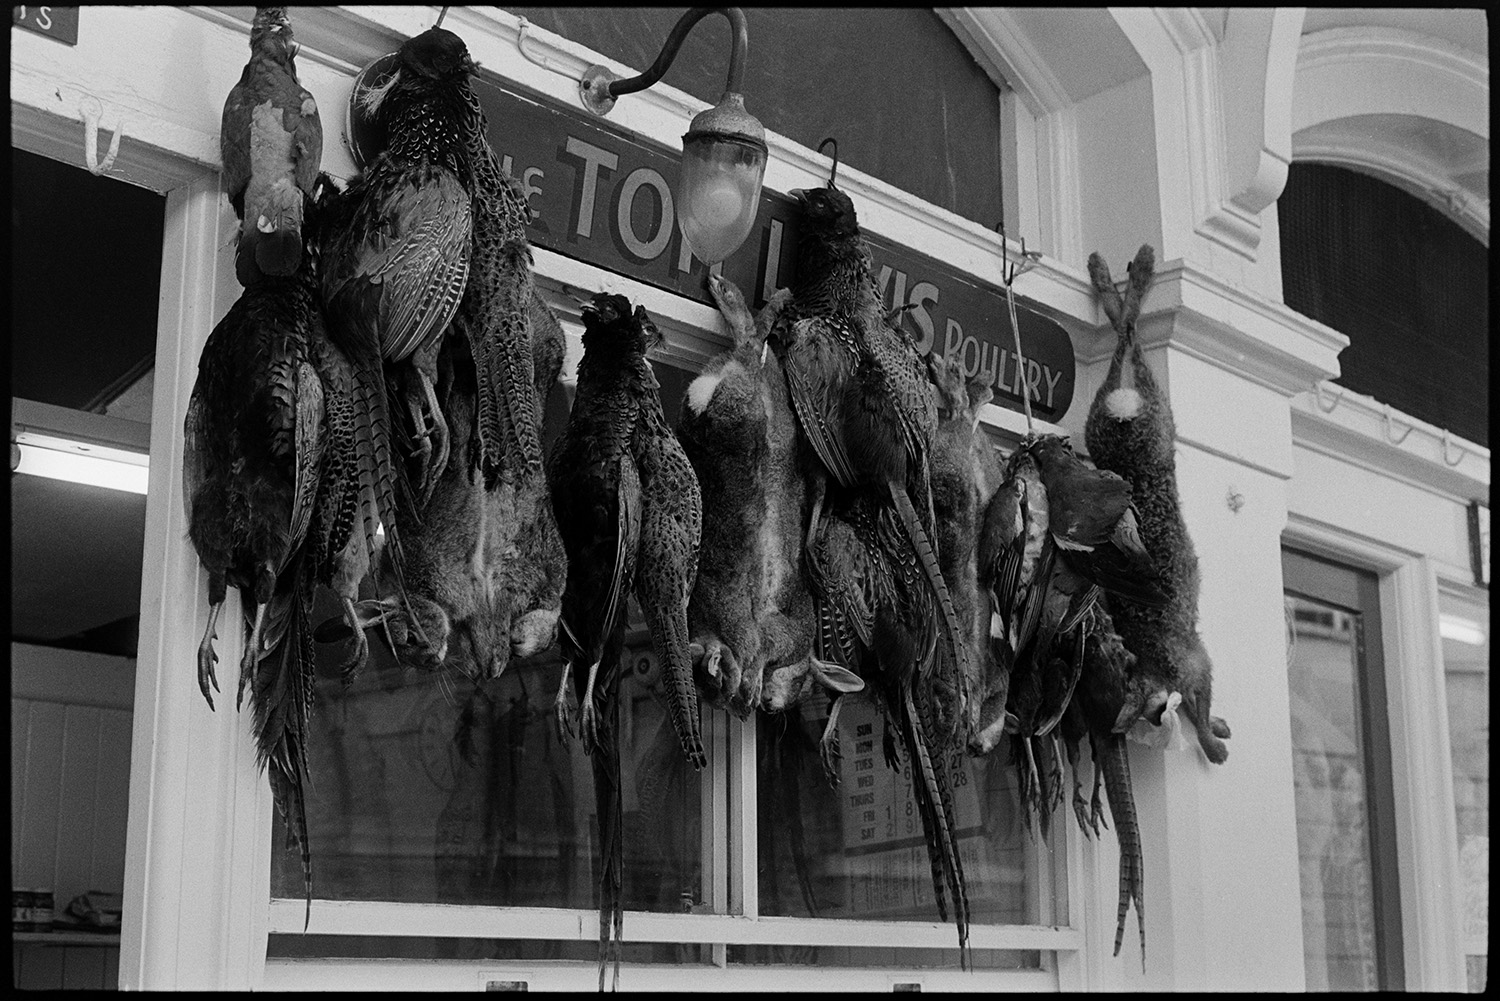 Game poultry hanging outside butchers shop.
[Pheasants, rabbits and pigeons hanging outside Tom Lewis butcher's shop in Butchers Row, Barnstaple. The shop sign and an electric light are visible.]